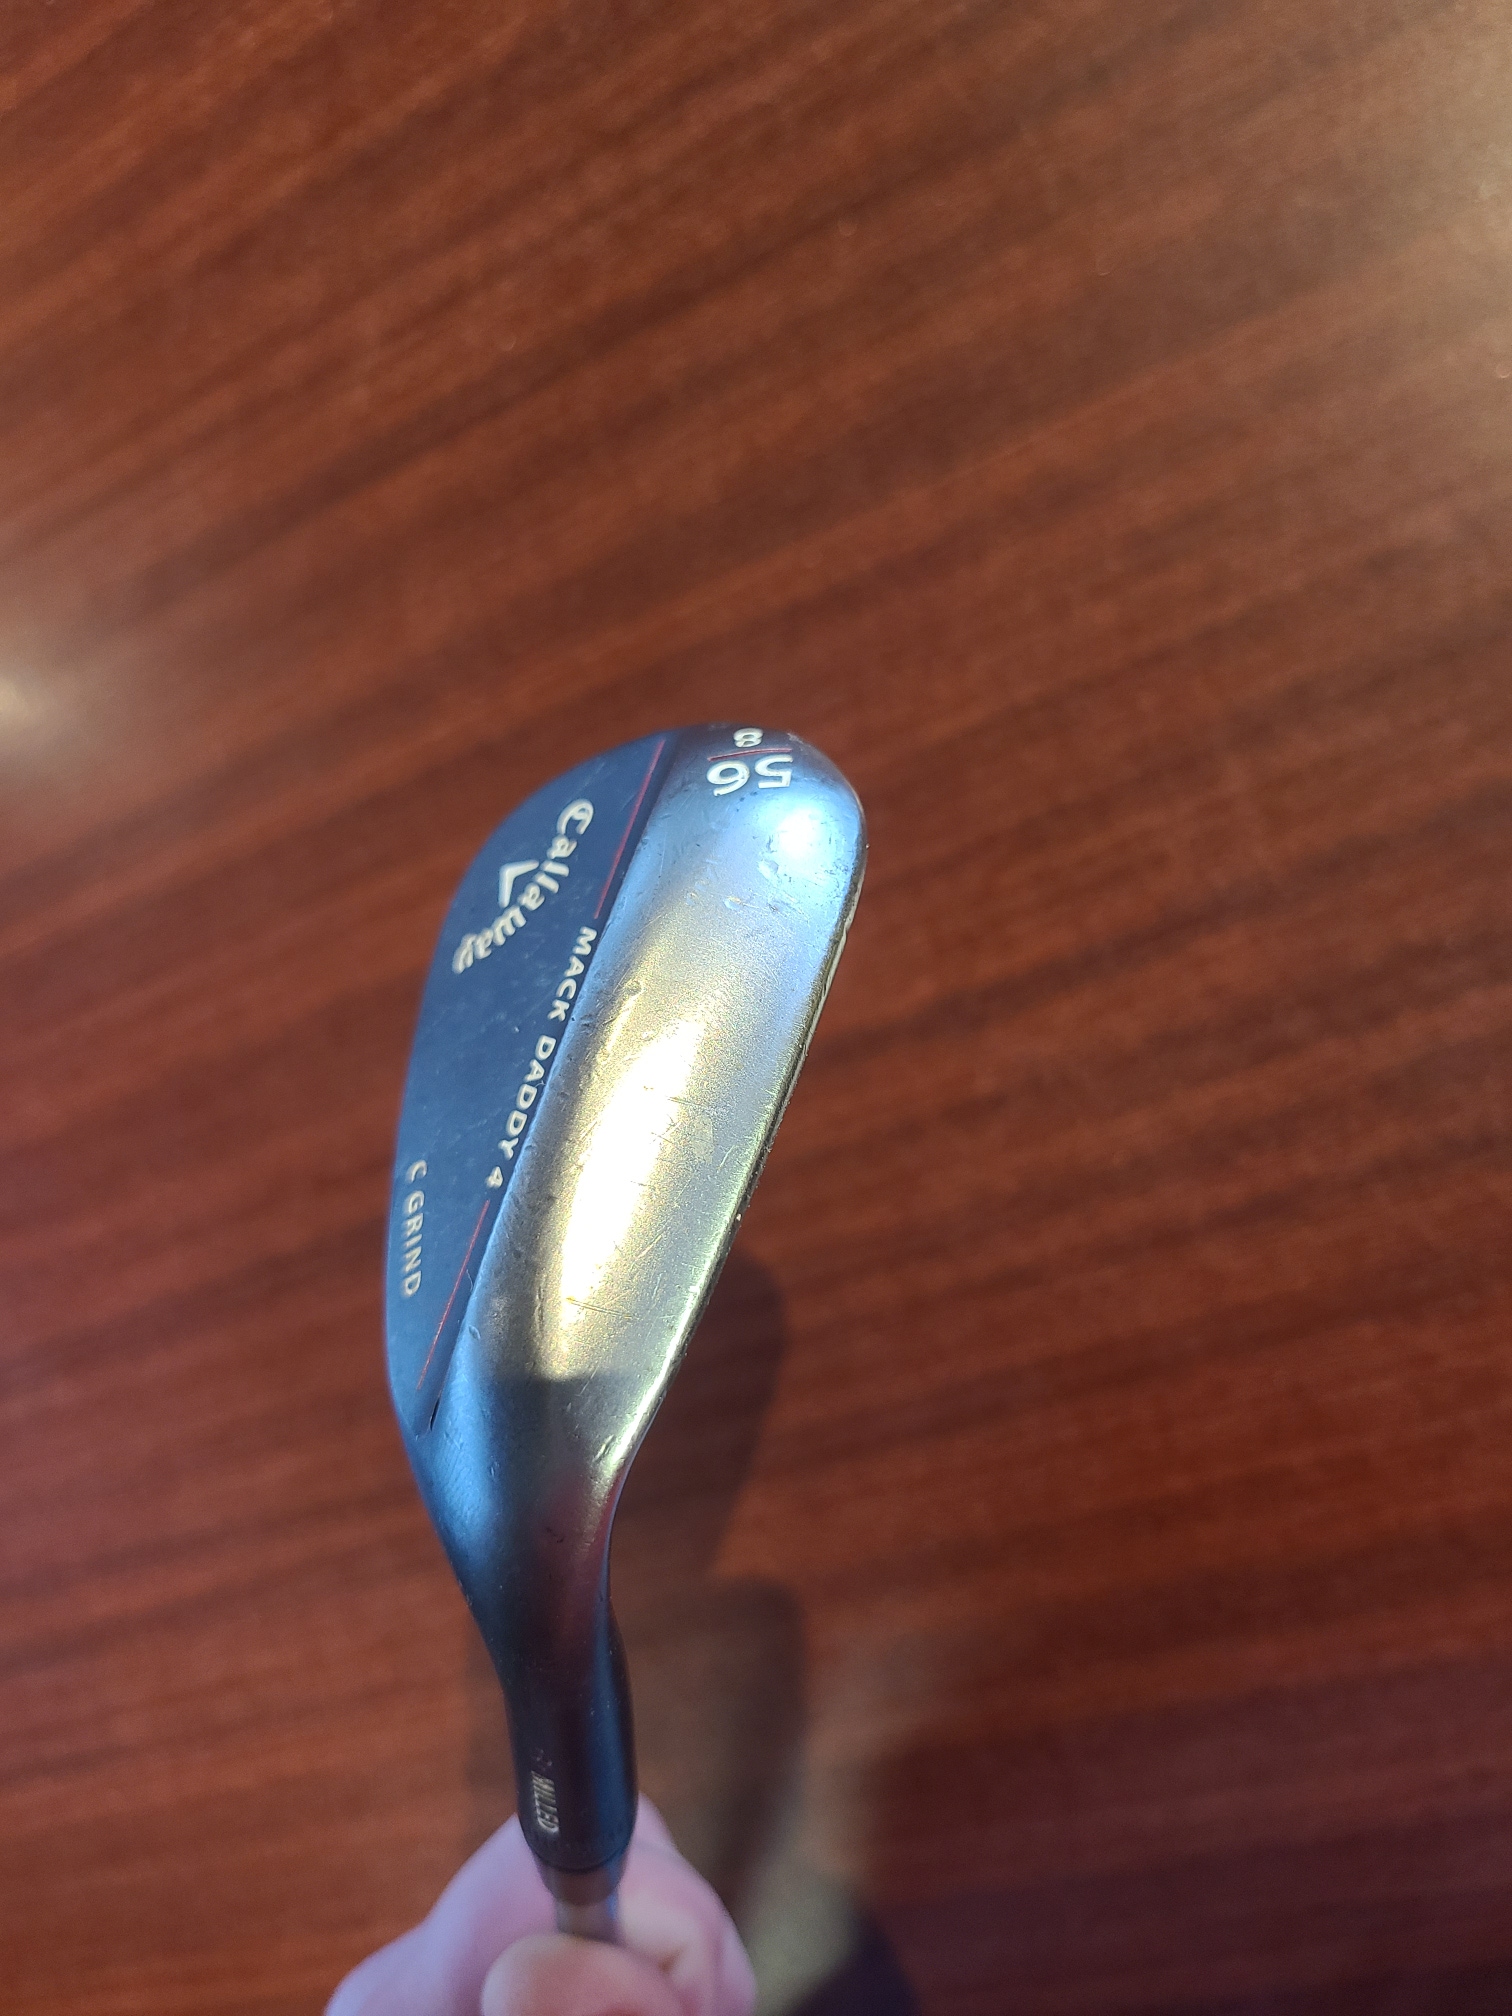 Used Men's Callaway Right Handed Mack Daddy 4 Wedge Wedge Flex 56 Degree